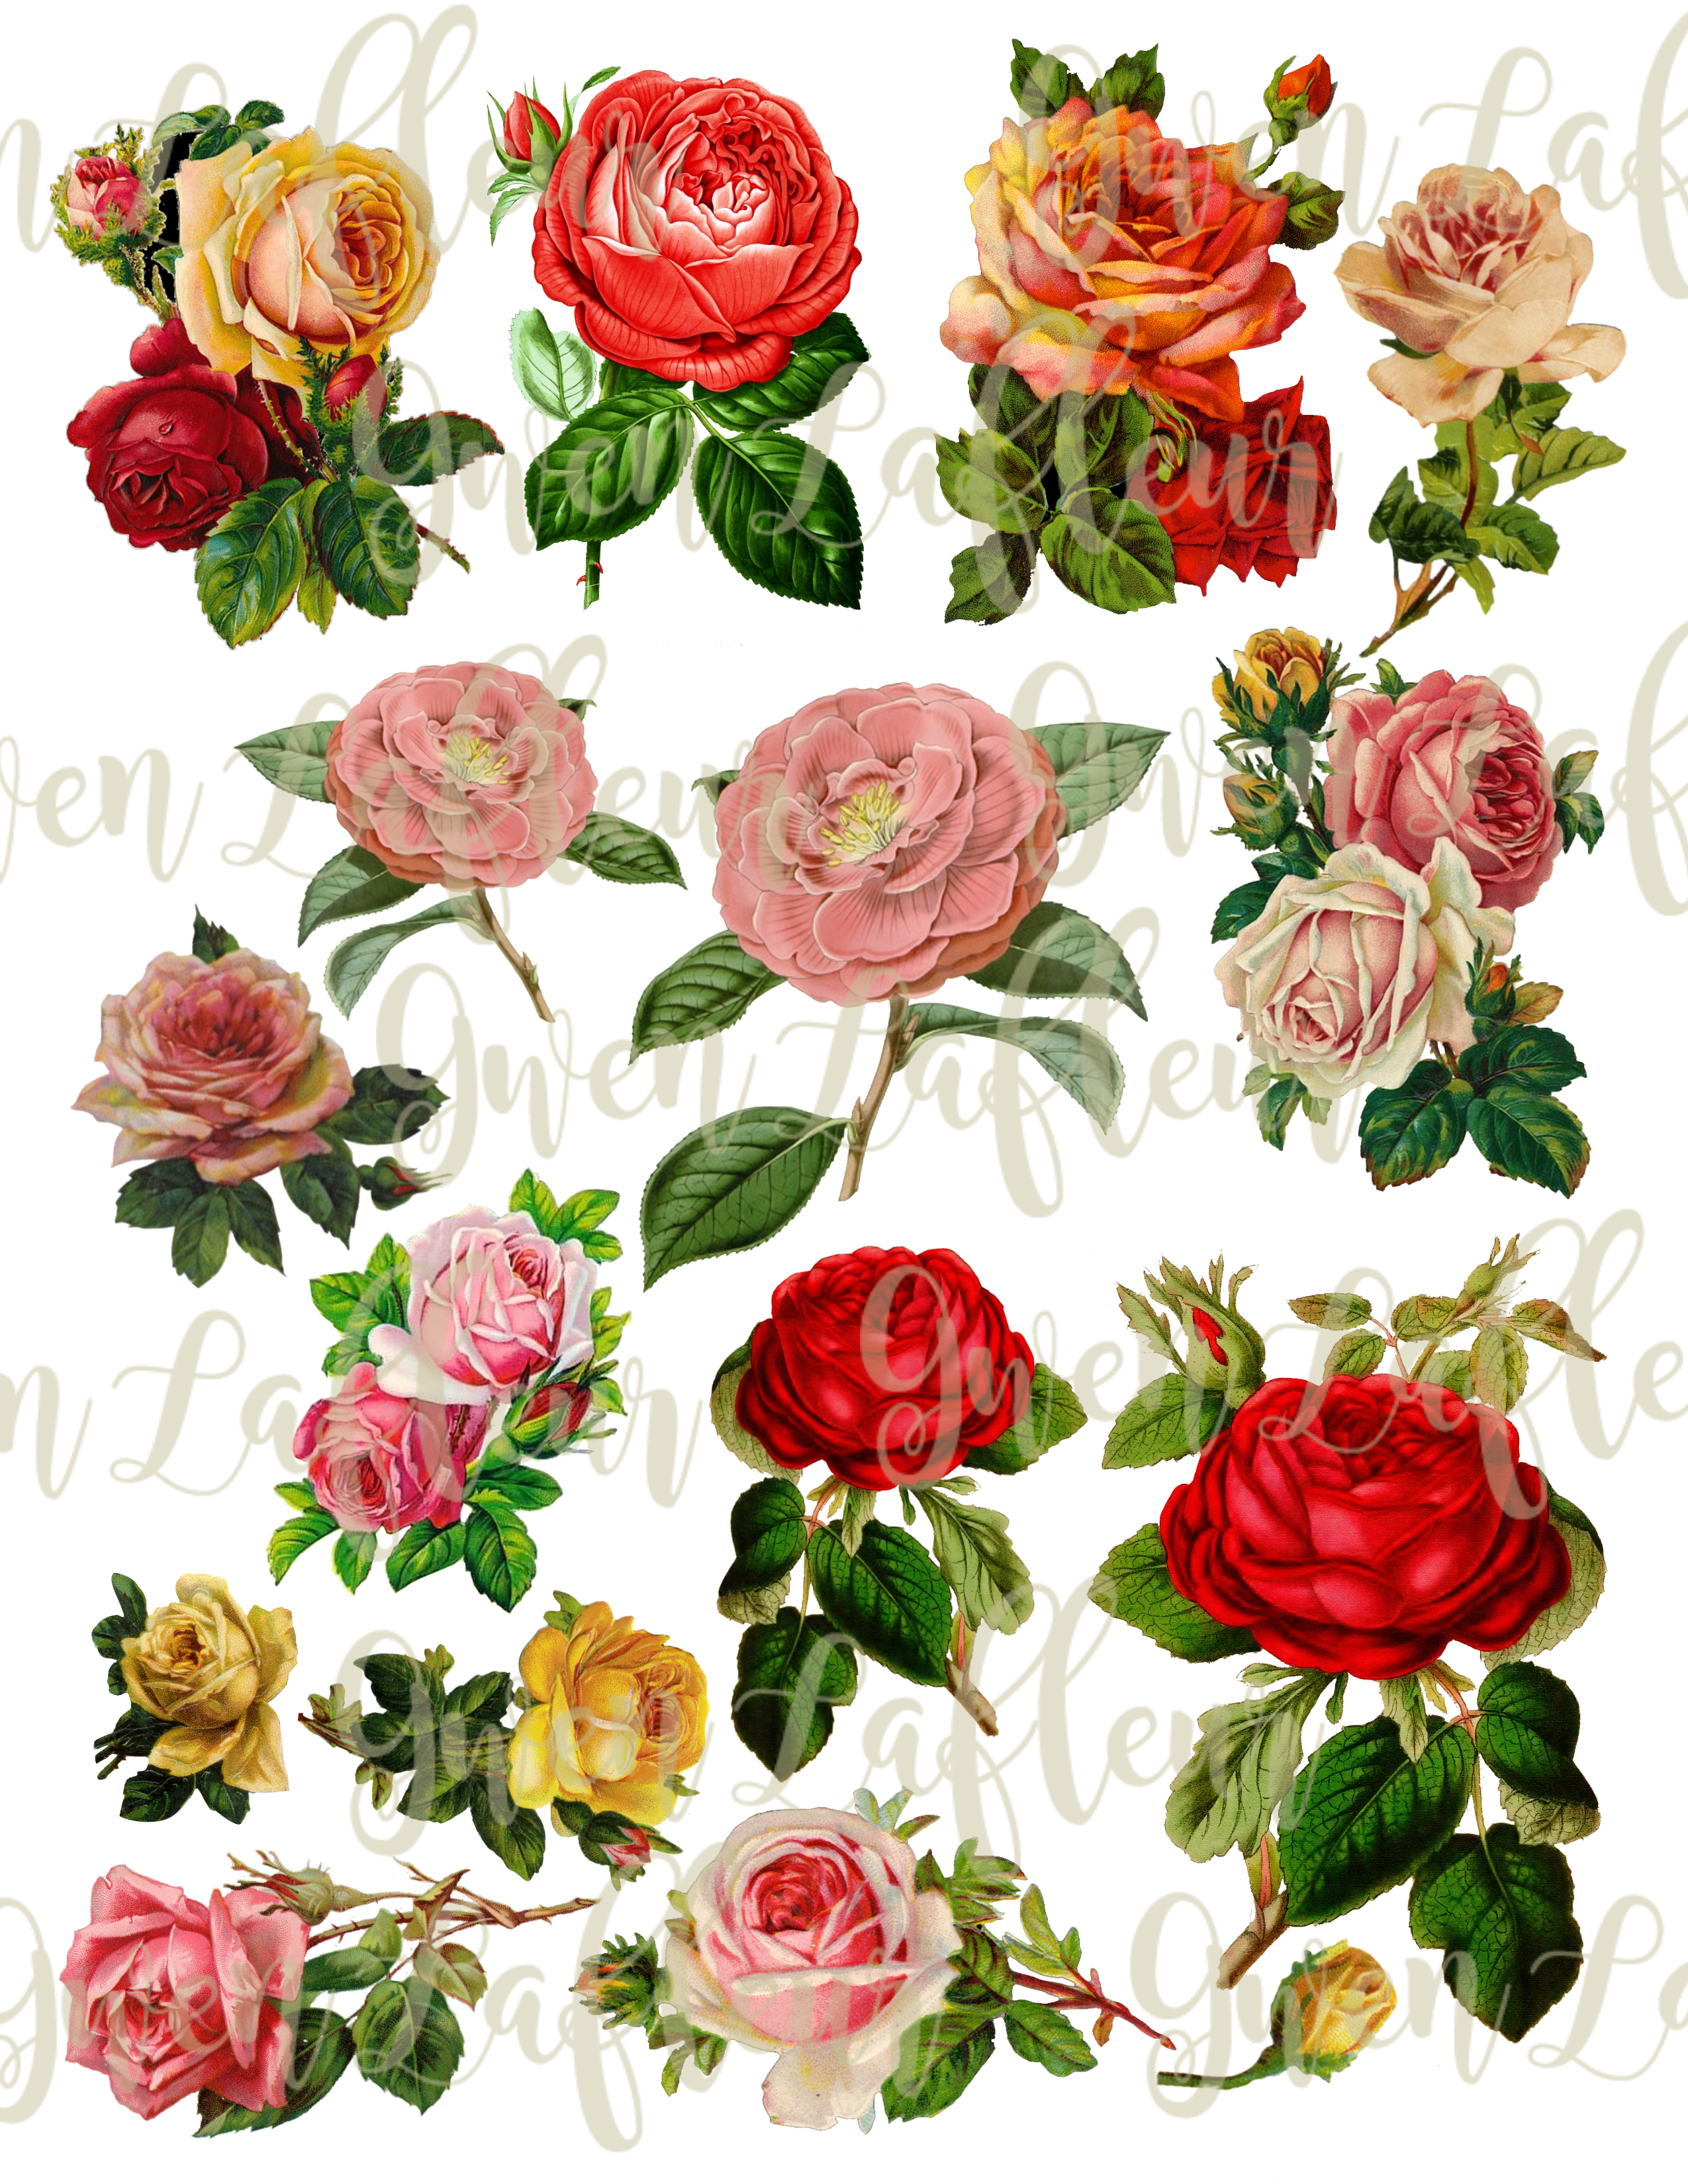 Romantic Roses -​ Downloadable Collage Cut-Outs